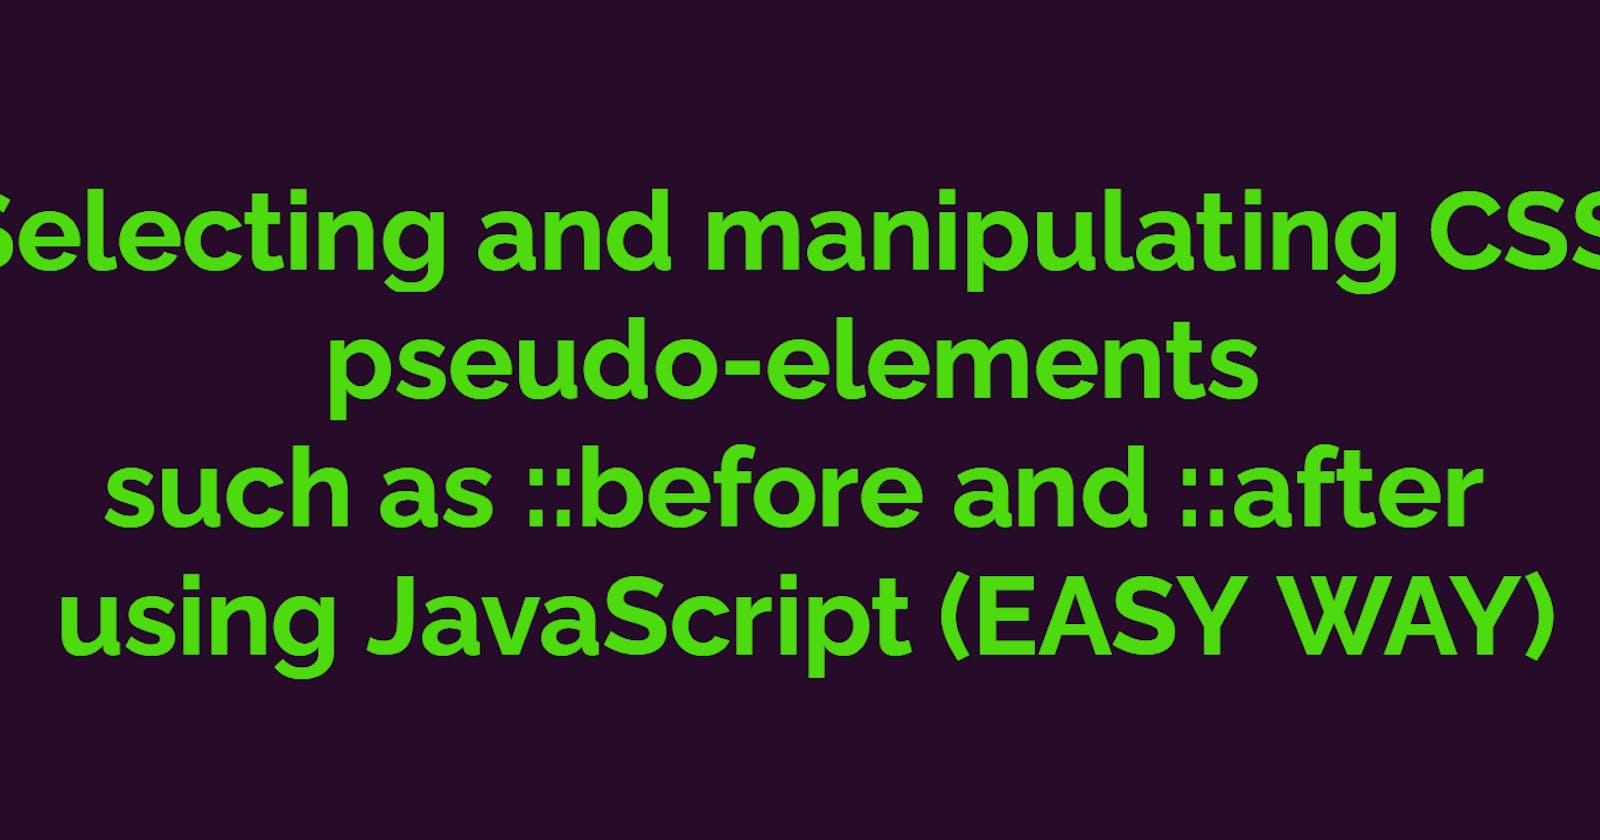 Selecting and manipulating CSS pseudo-elements such as ::before and ::after using JavaScript (EASY WAY)